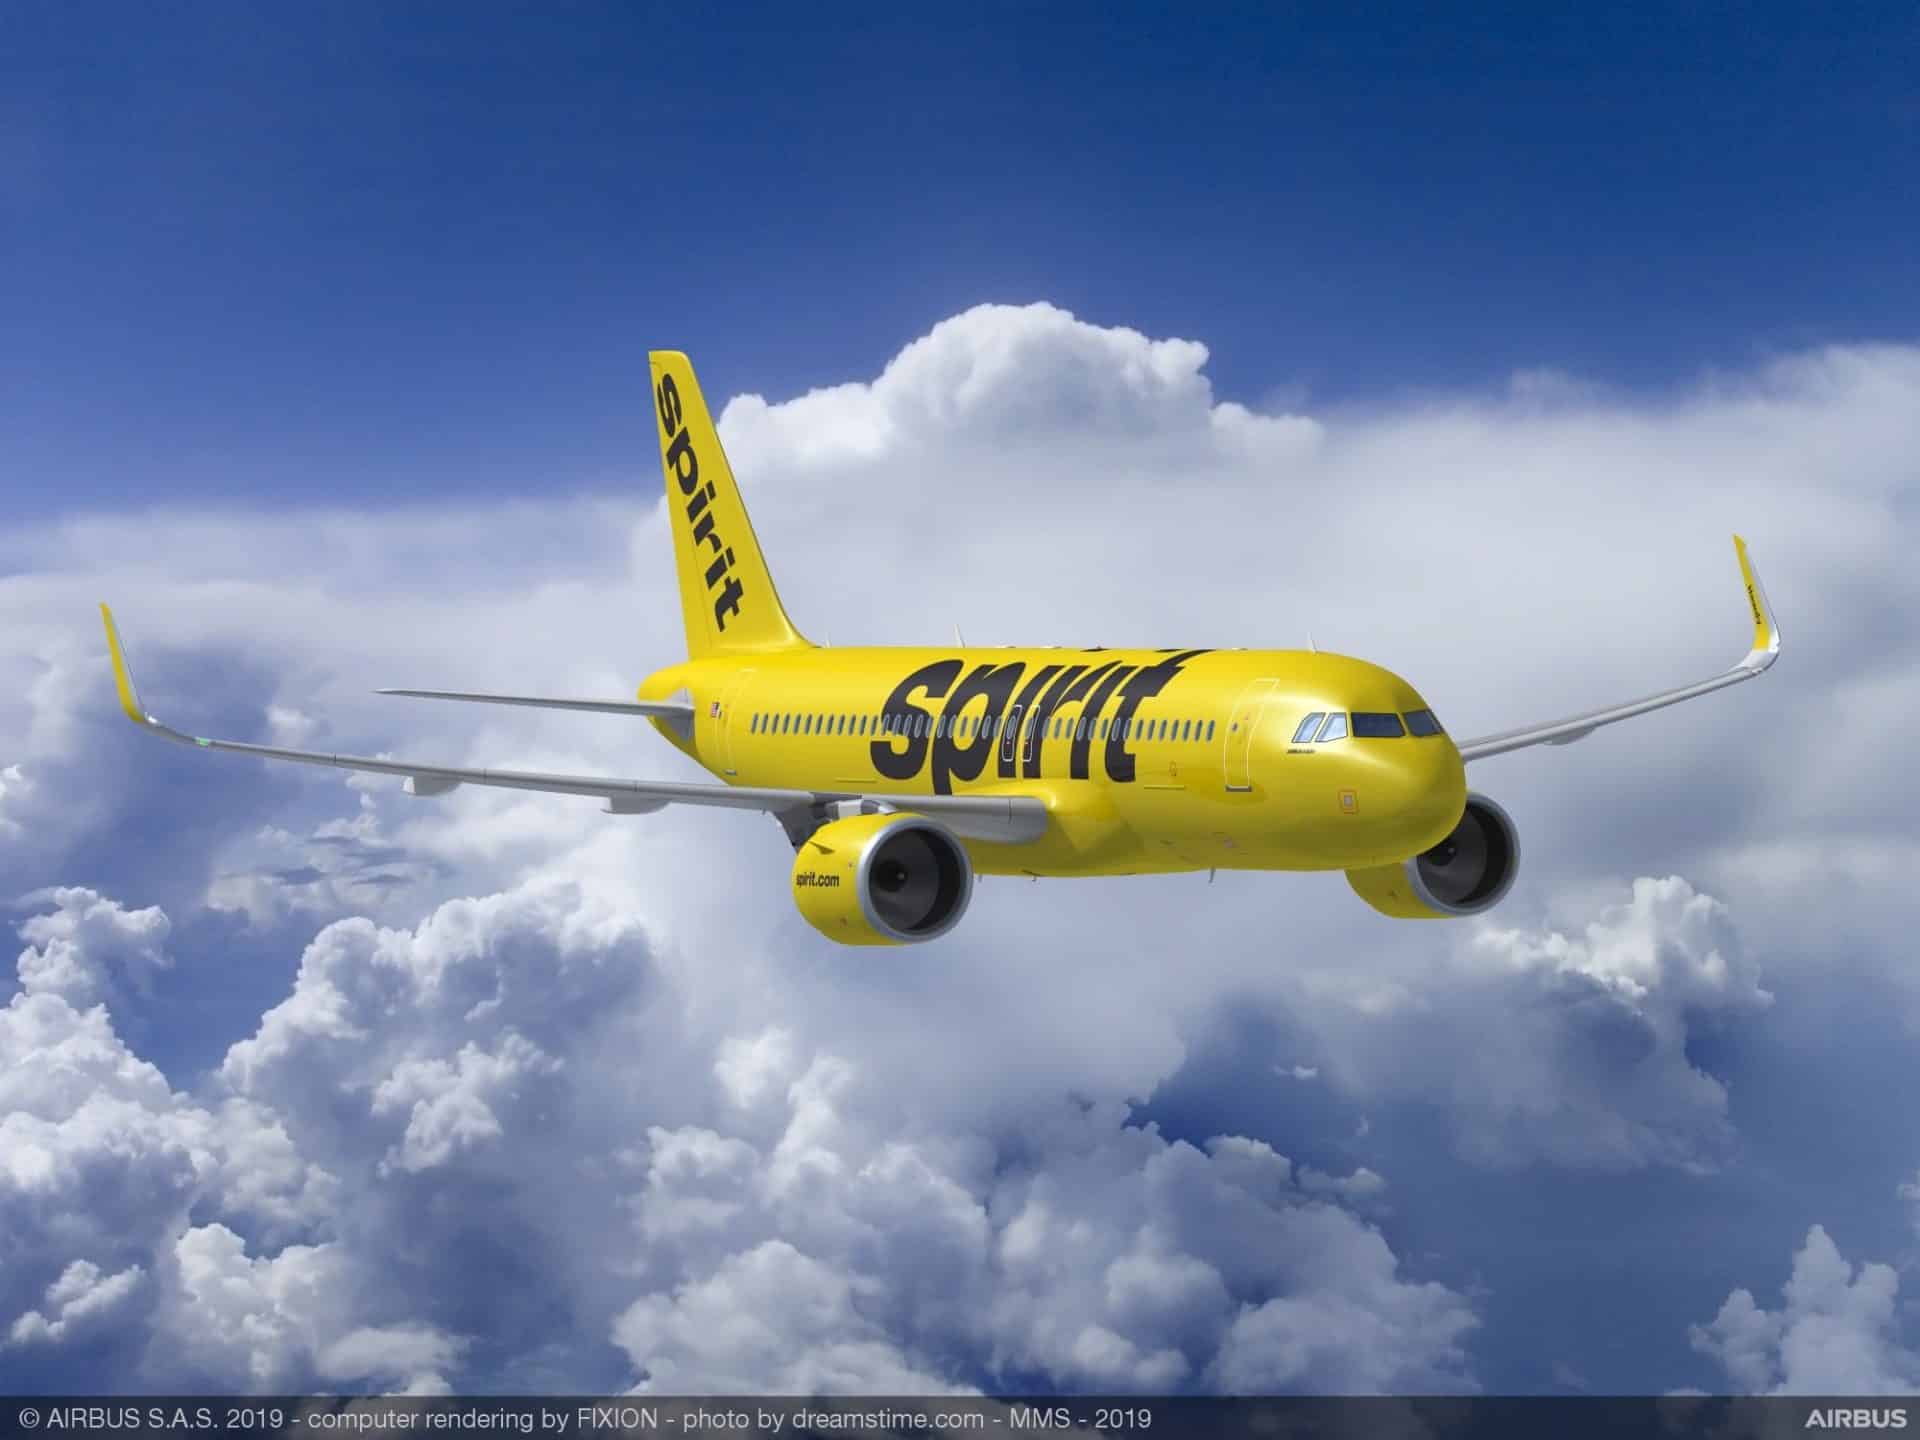 Spirit Airlines signs MoU for up to 100 A320neo Family aircraft